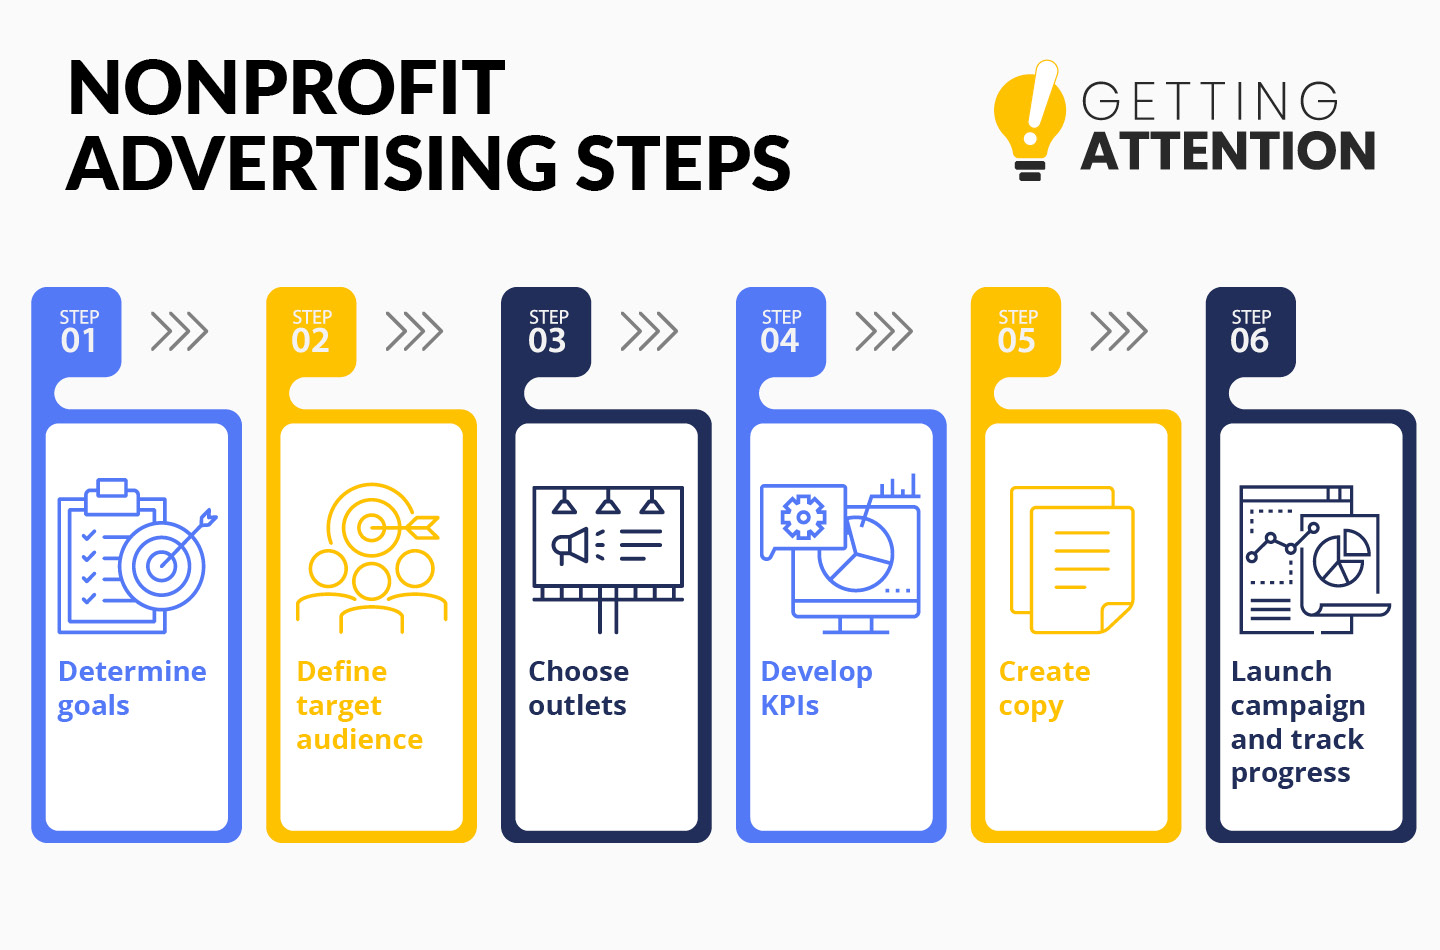 These six steps listed in this image and the sections below will help your team create an effective nonprofit advertising plan.